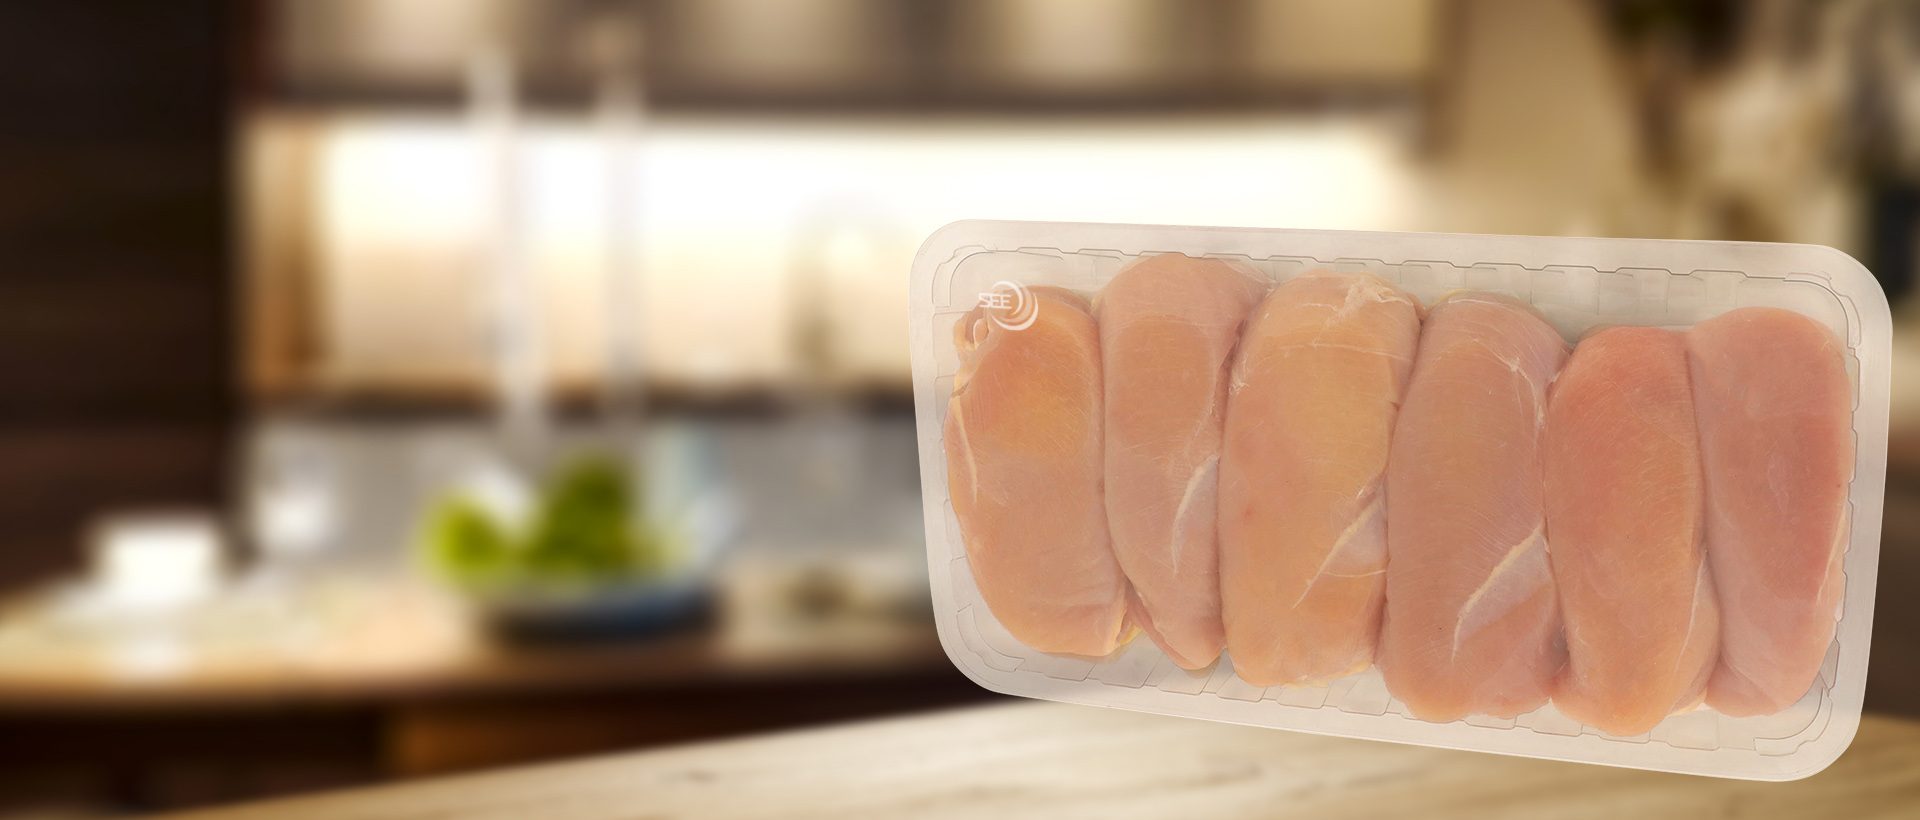 CRYOVAC brand SES overwrap film over pork in clear tray